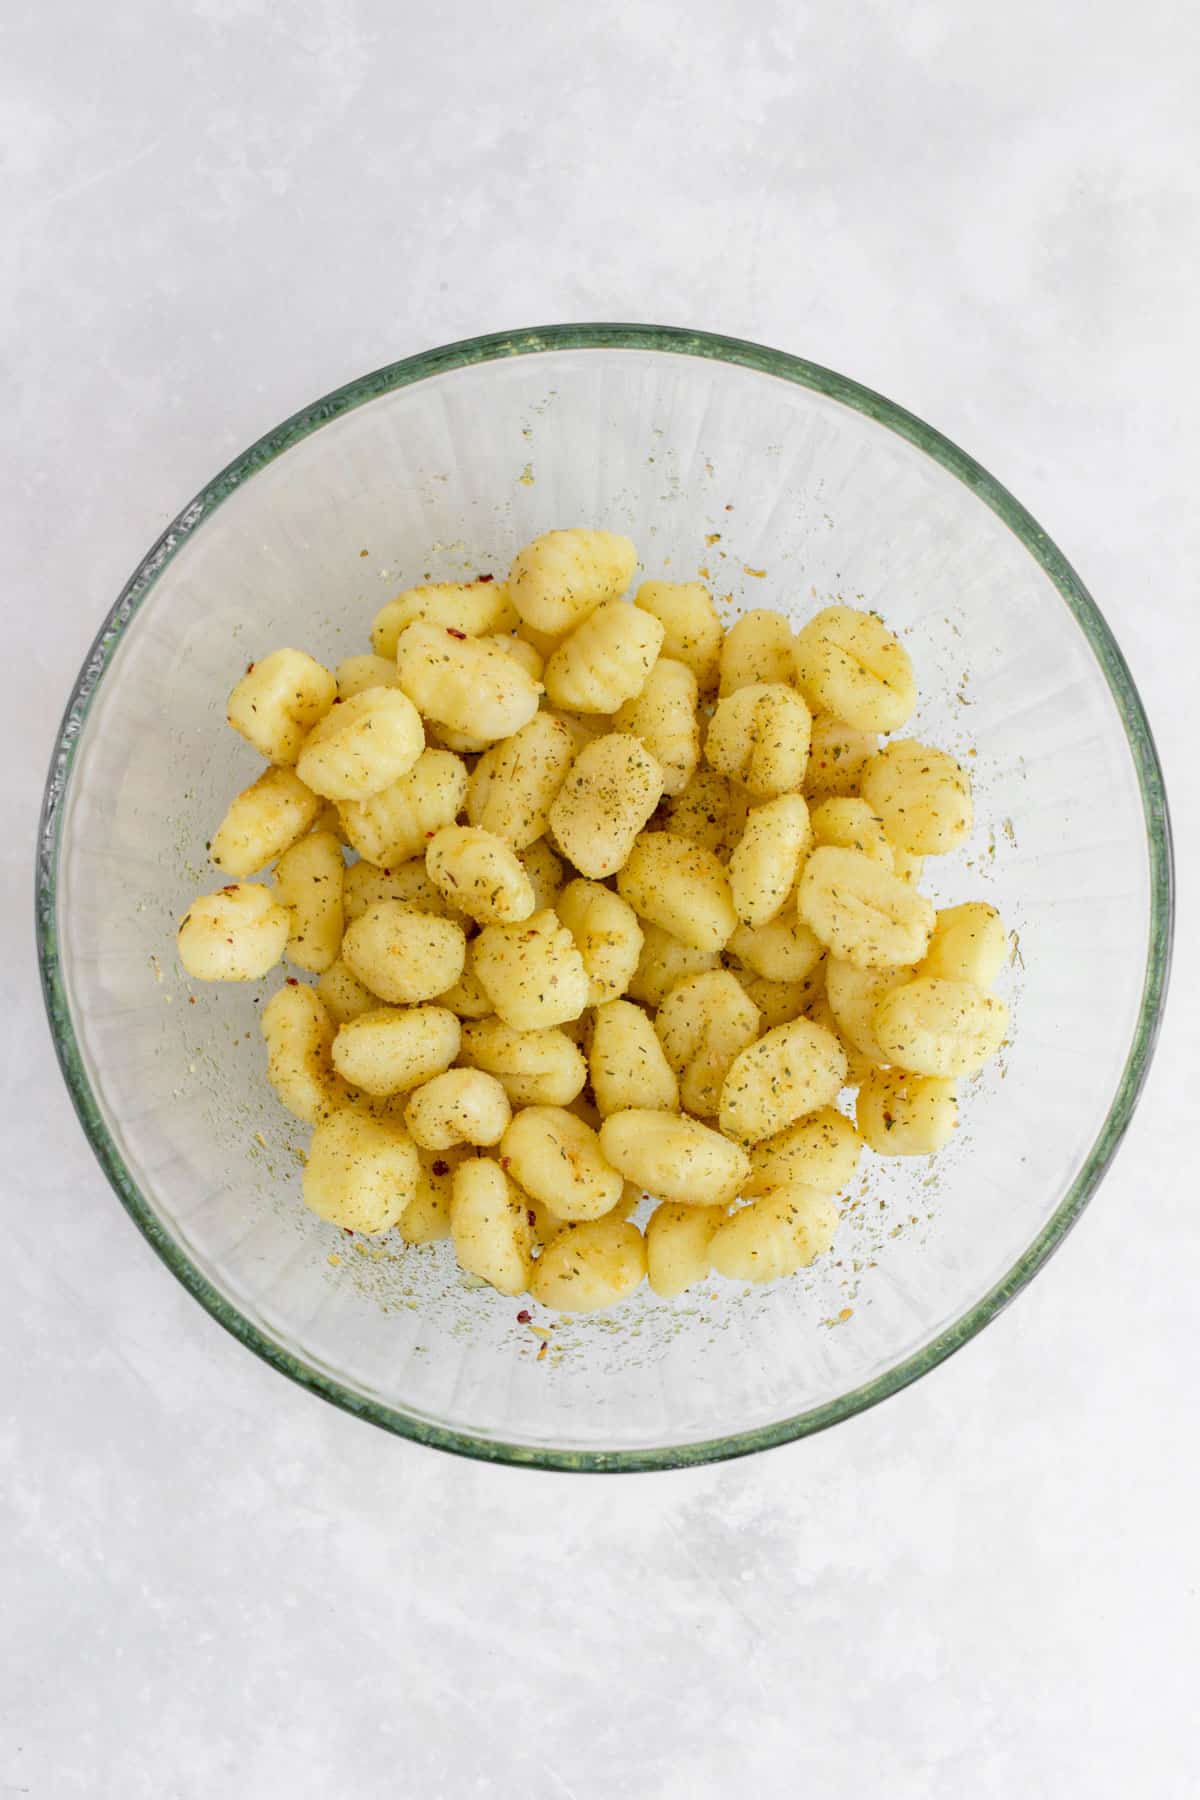 Overhead view of a bowl of gnocchi tossed in olive oil and seasonings.